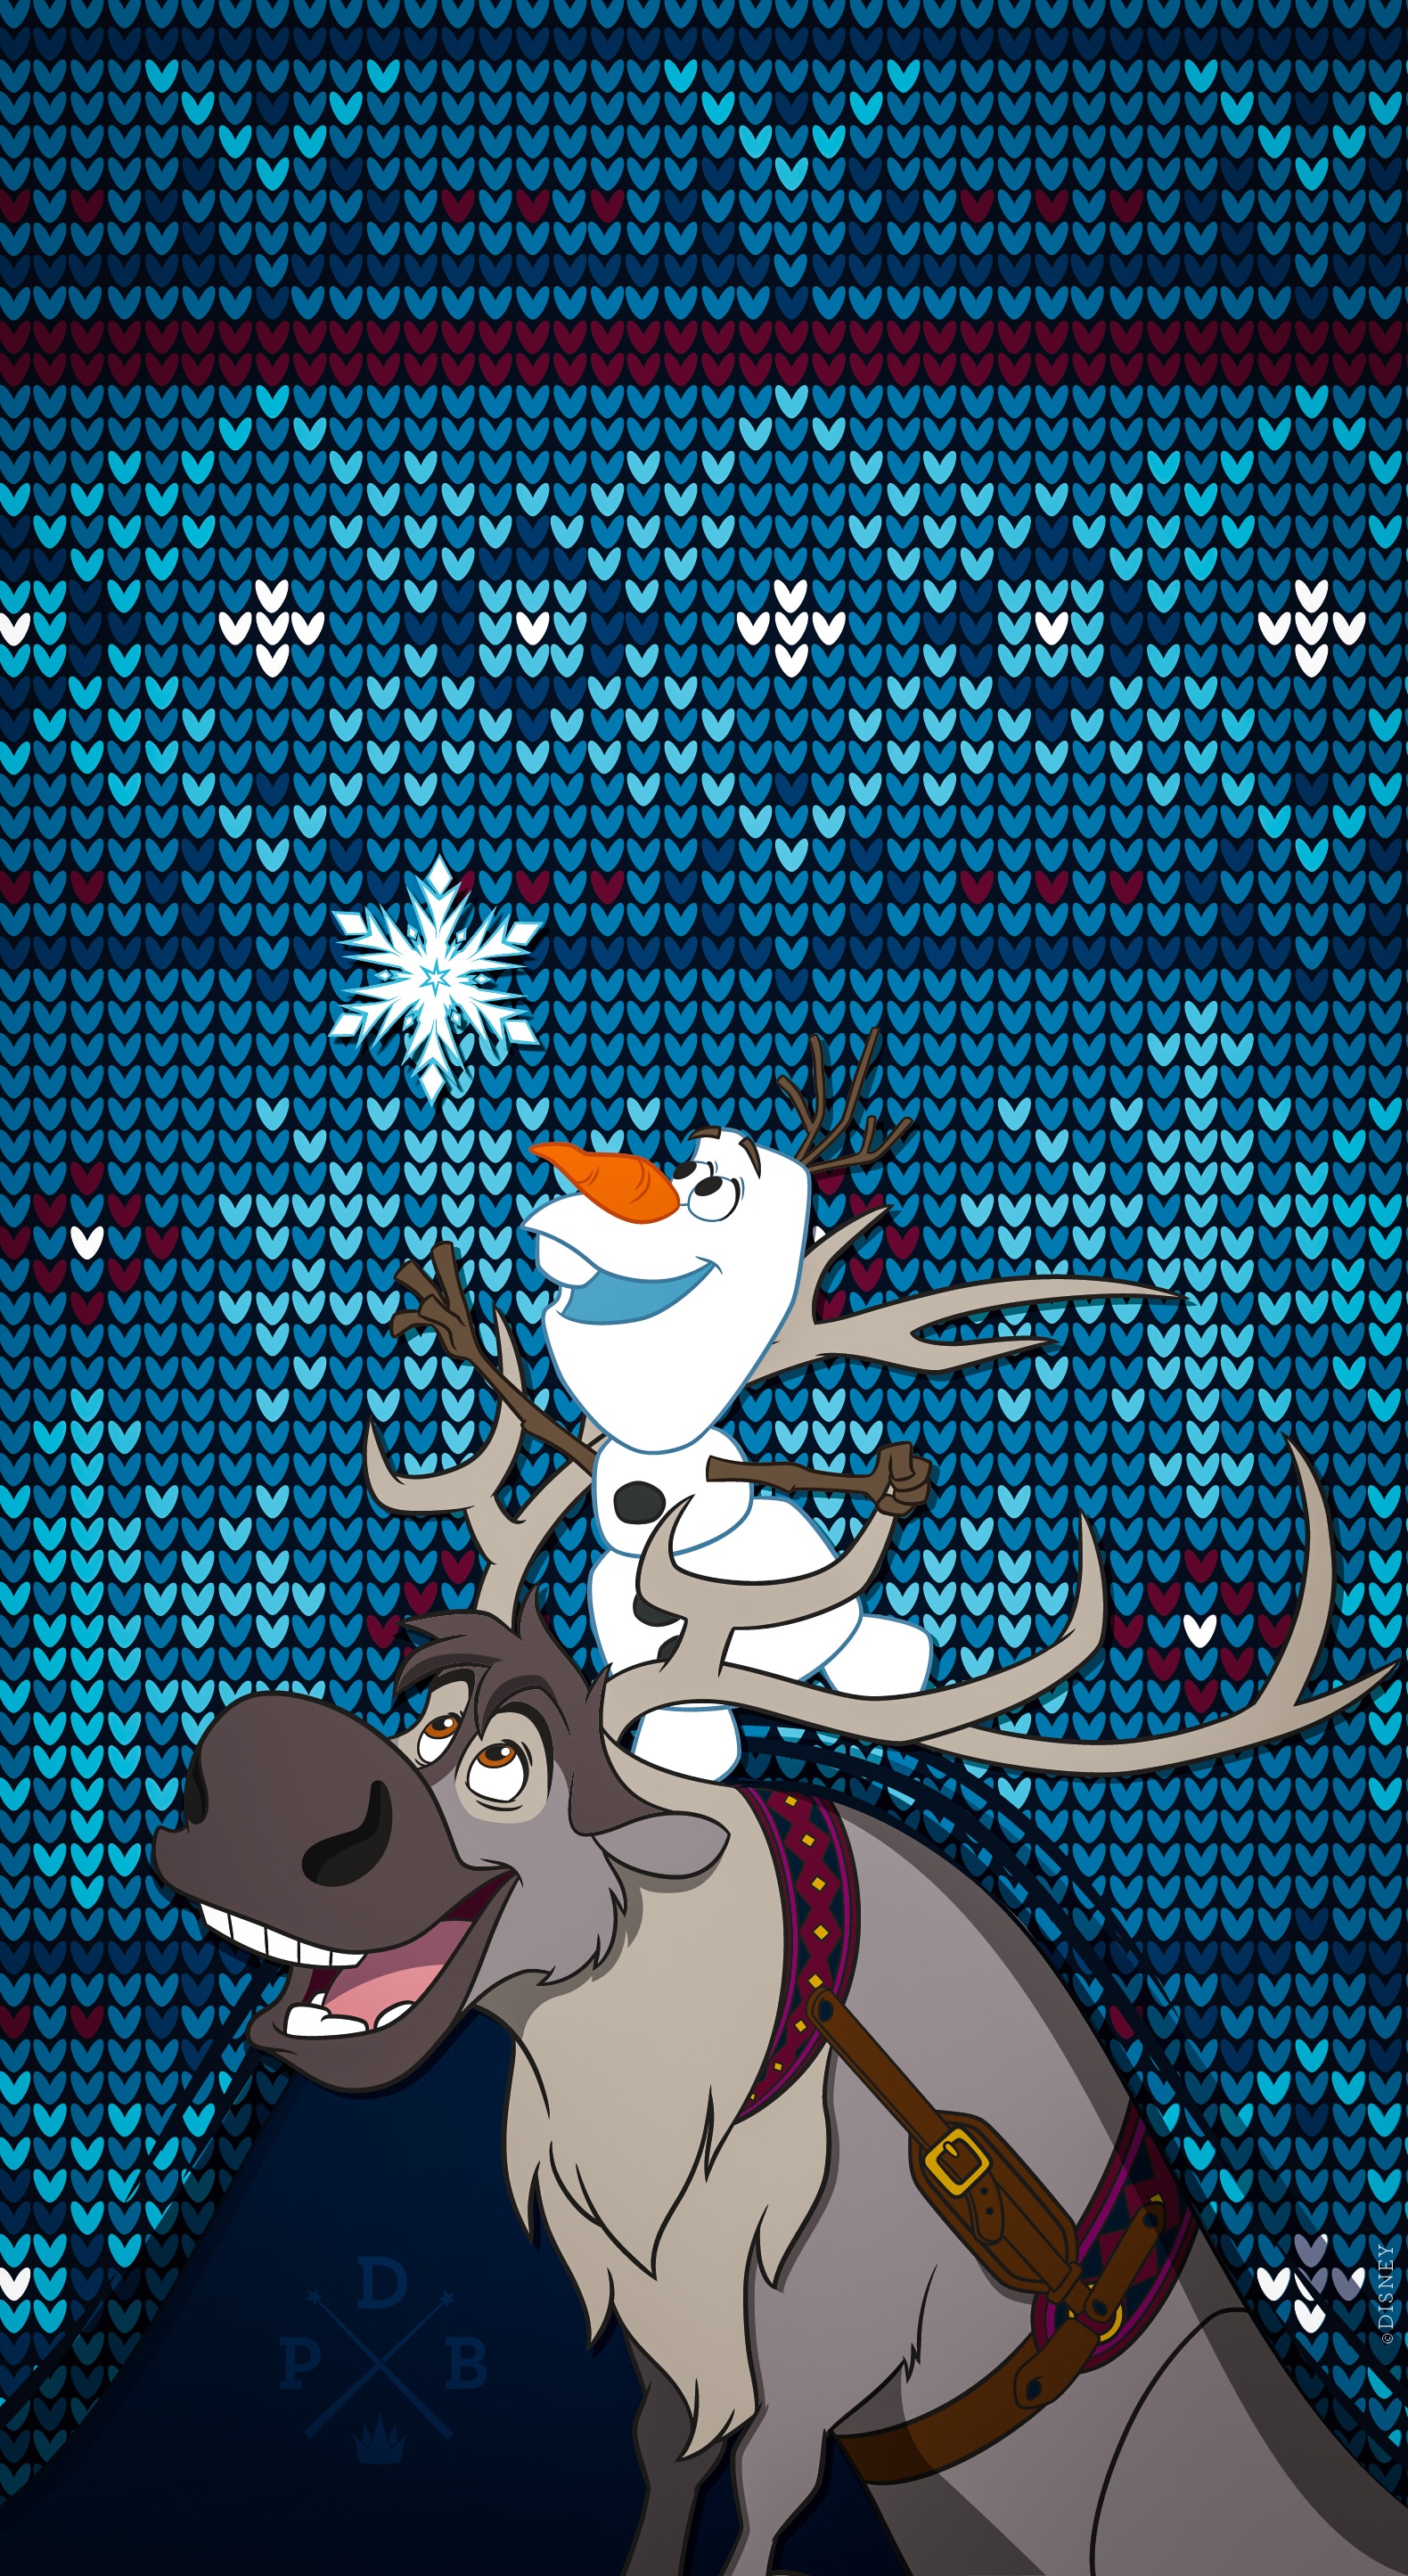 2019 Ugly Christmas Sweater Wallpaper – iPhone/Android | Disney Parks Blog